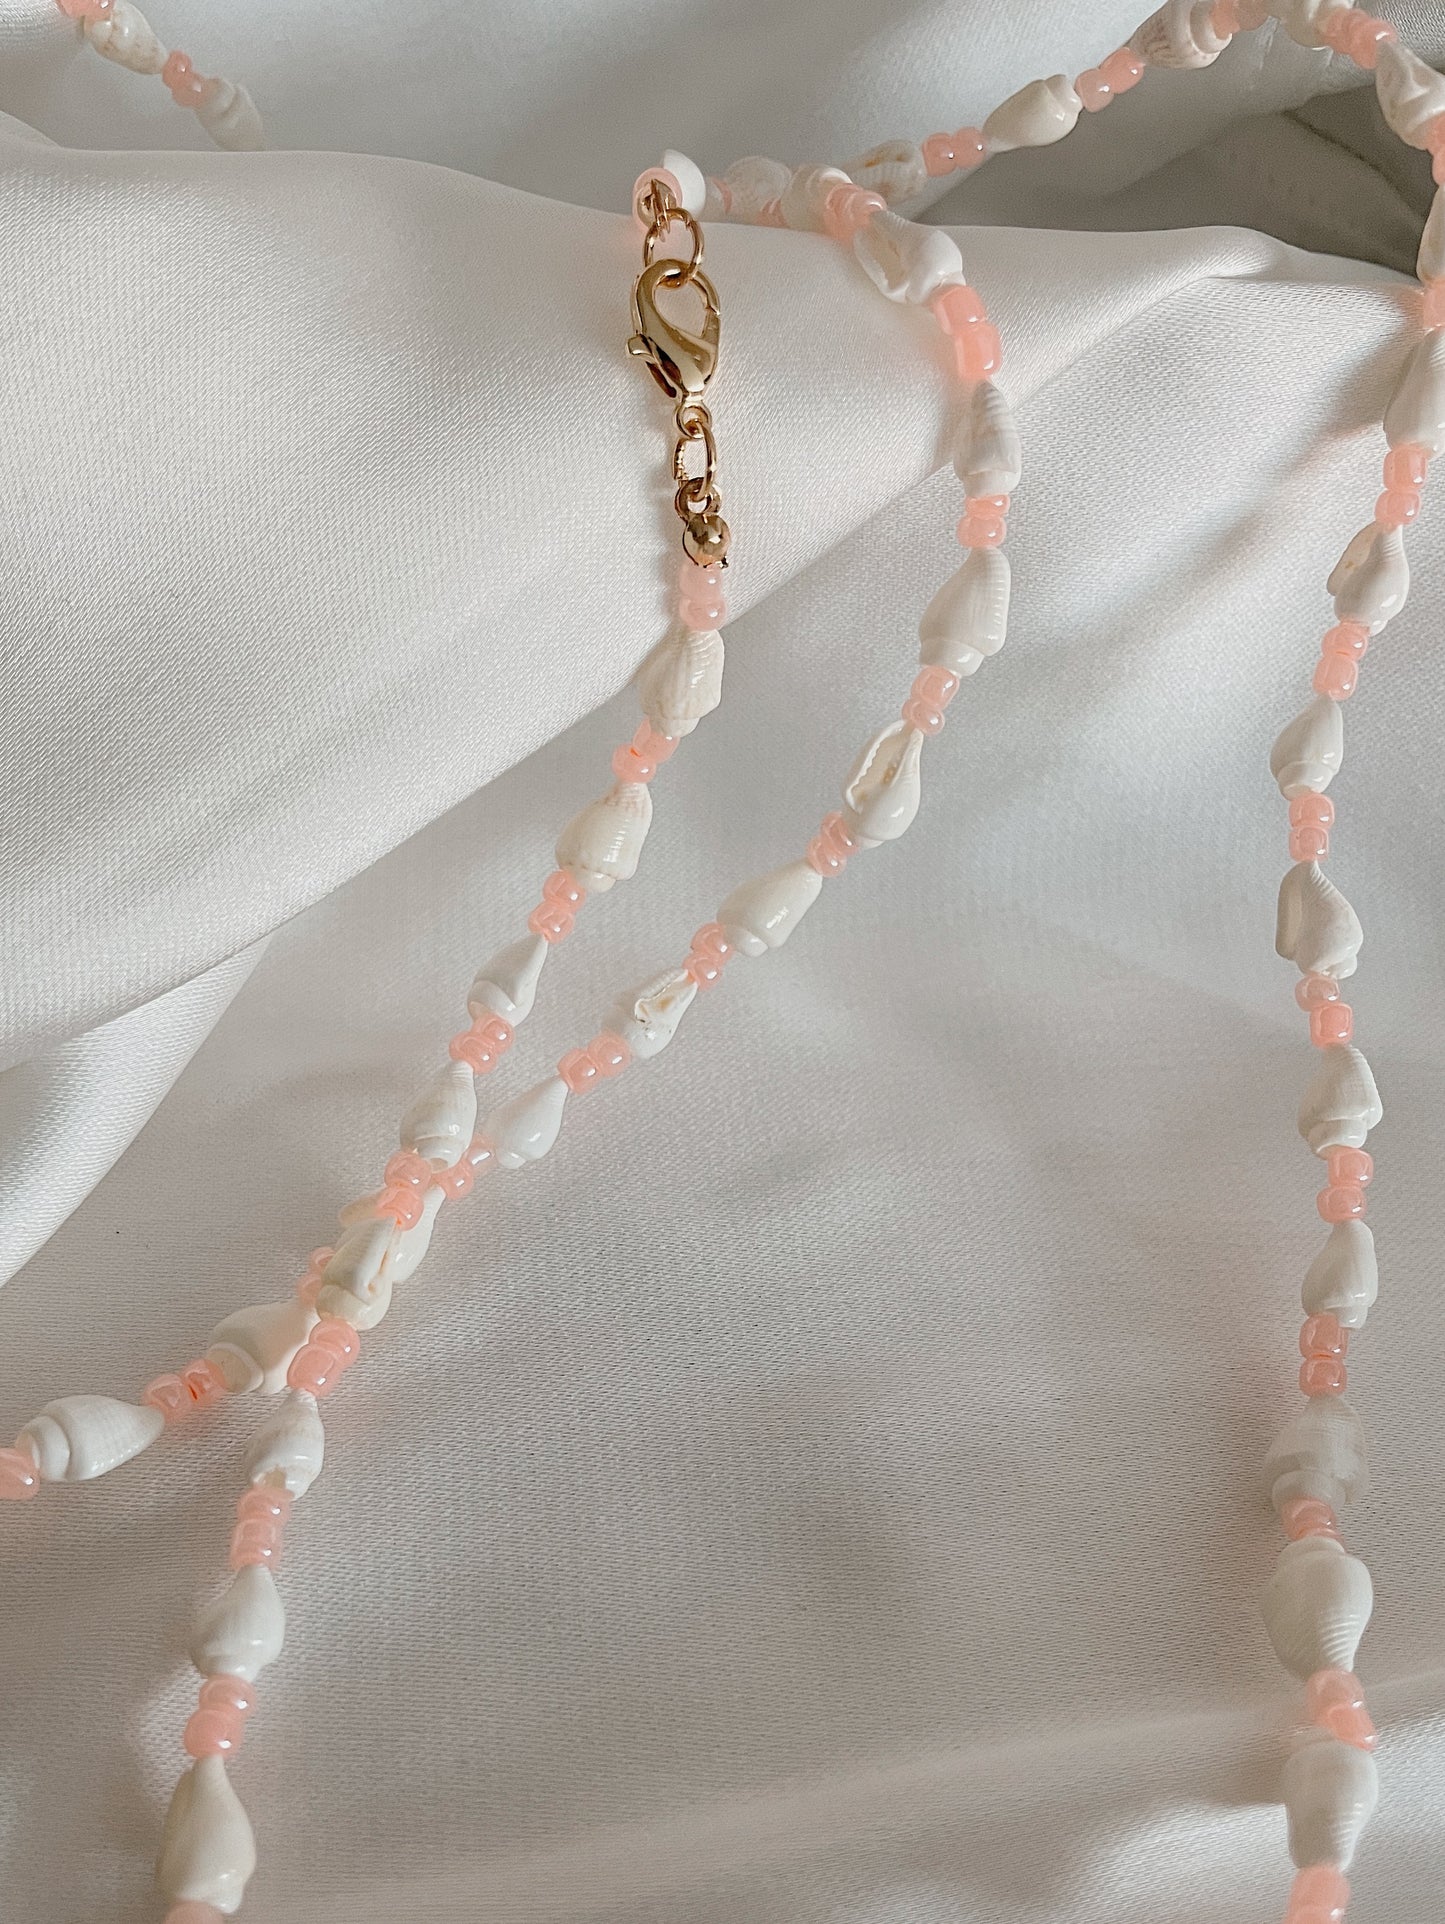 ISLA LIGHT PINK - seashell necklace with light pink beads